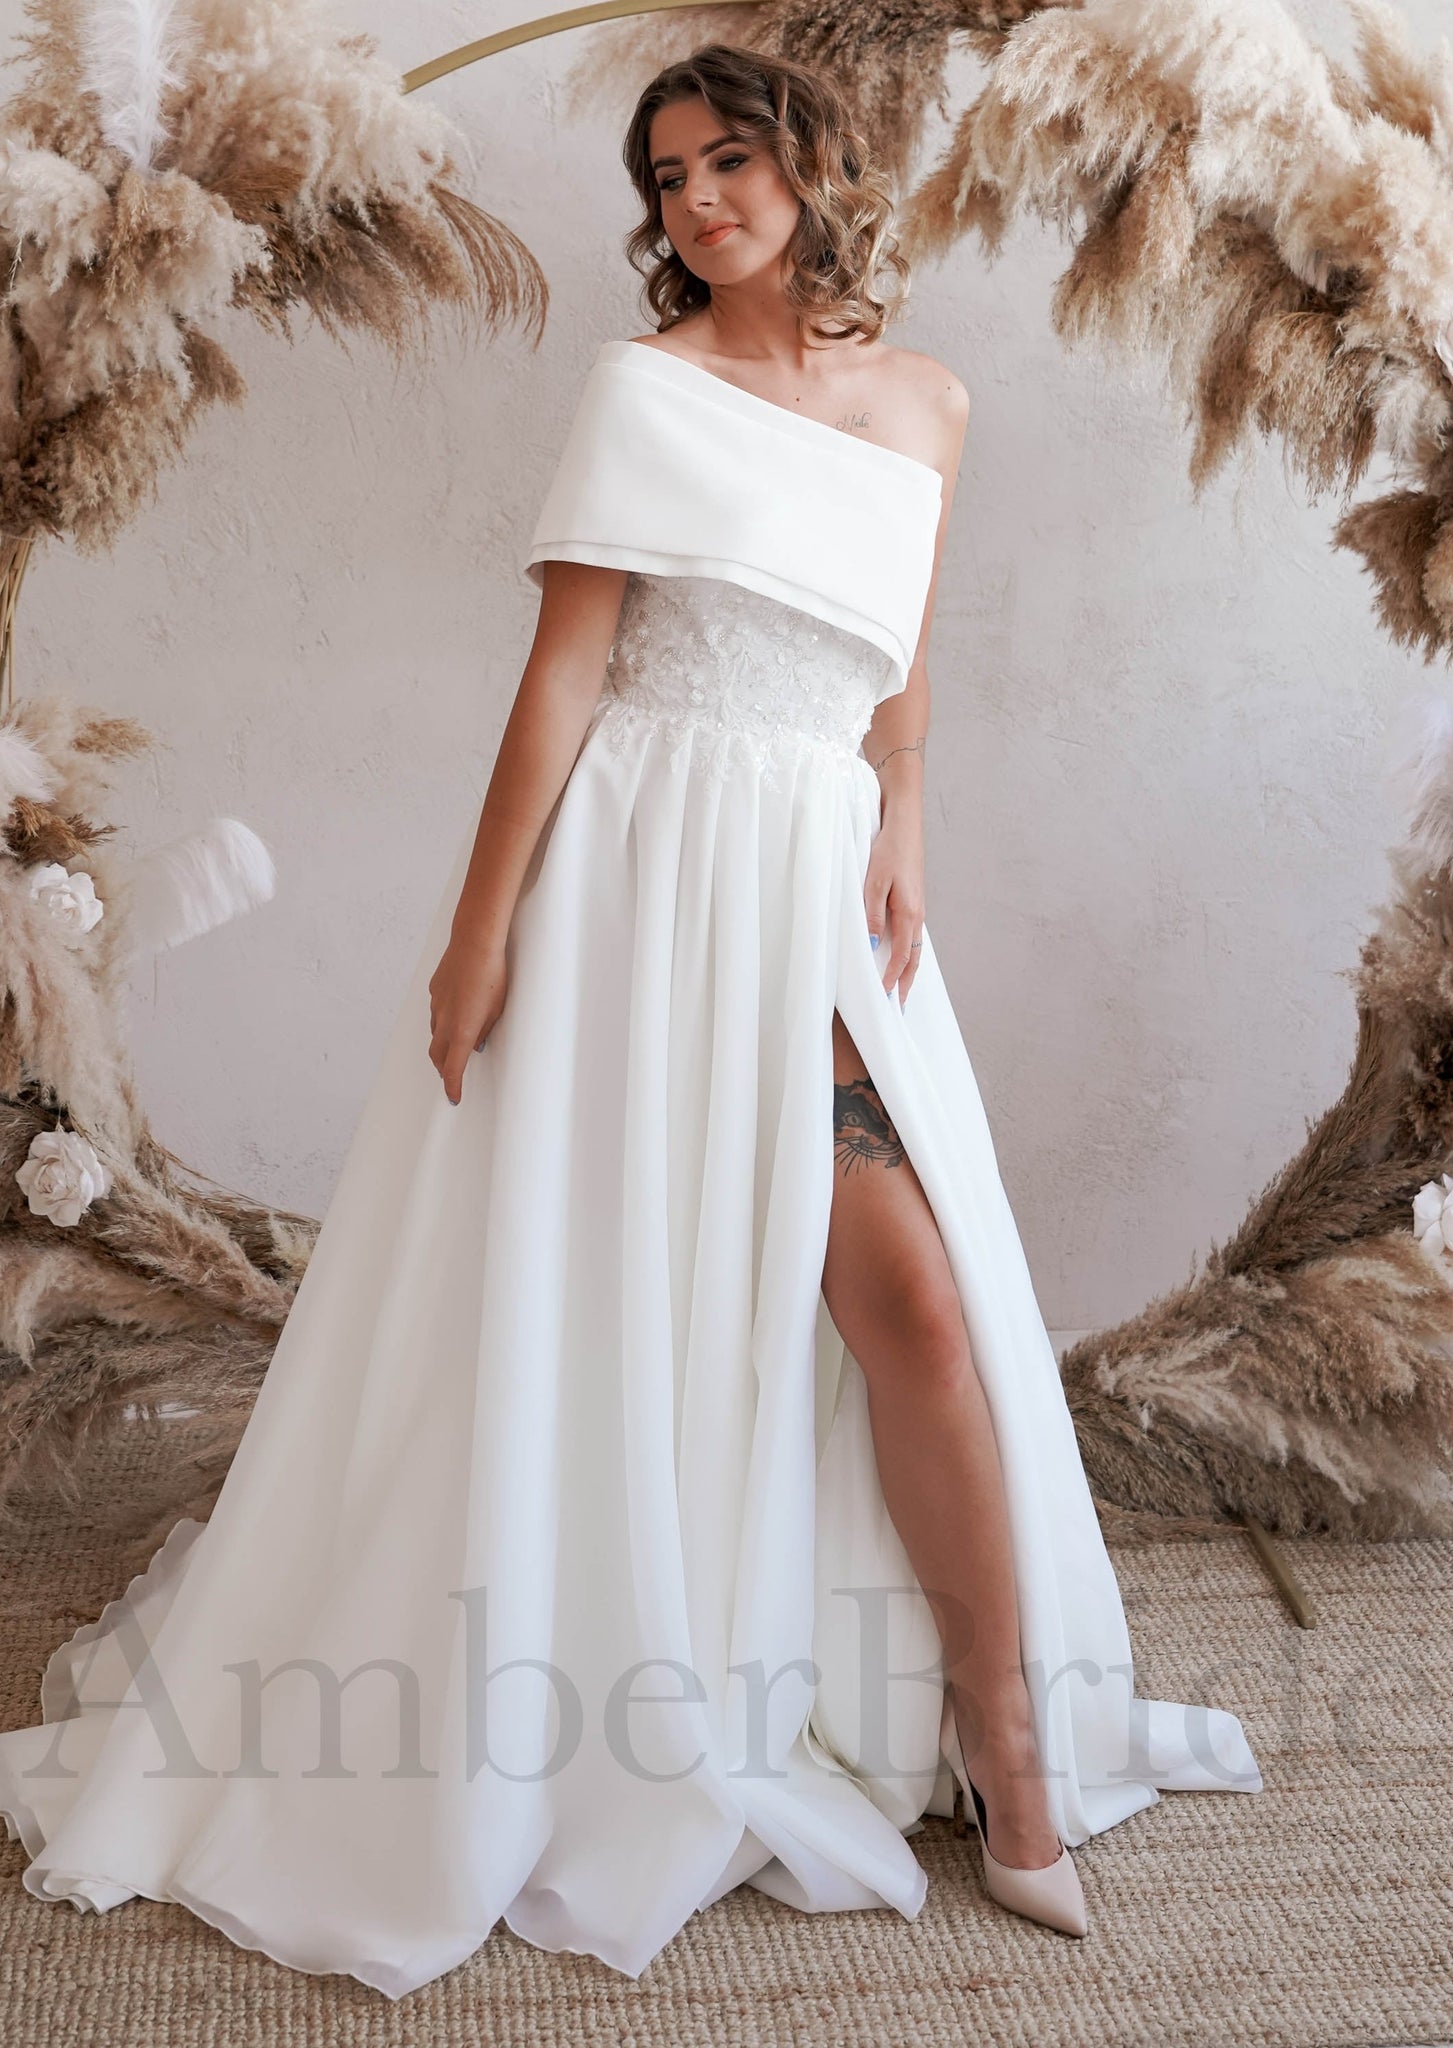 Unique Two Piece A Line Dress with One Shoulder Strapless Look and Bow Back Detail